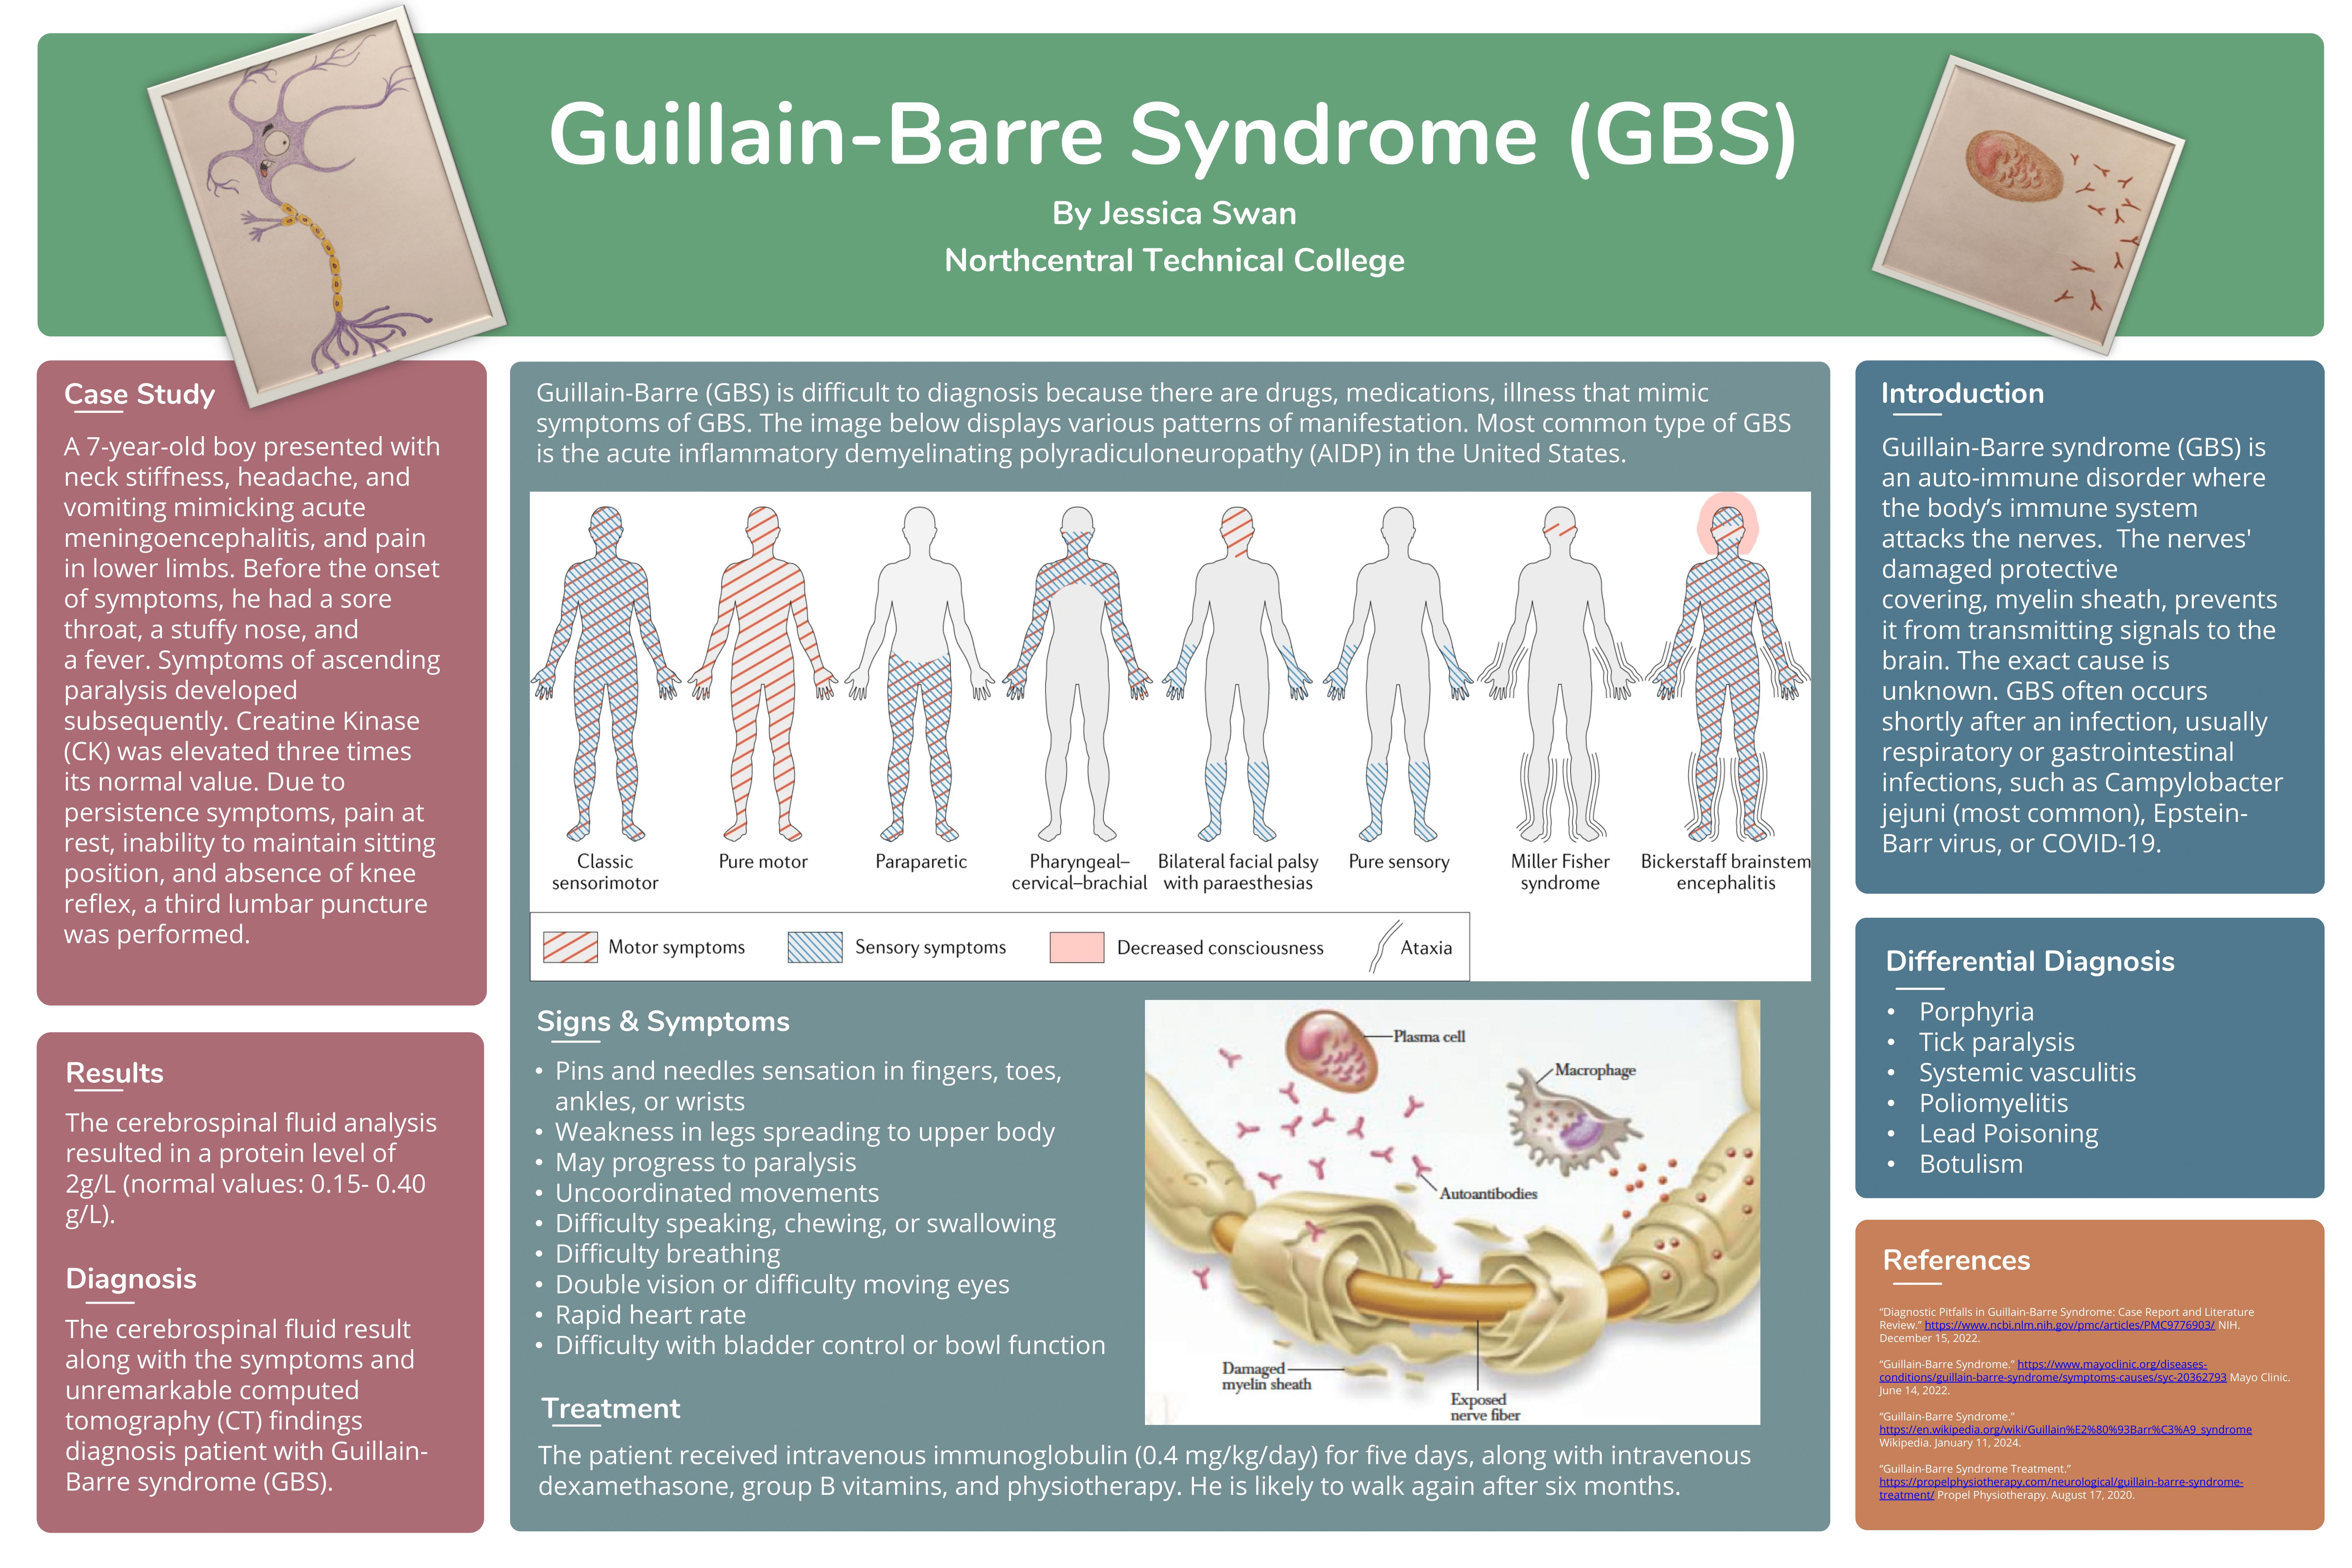 Guillain-Barre Syndrome (BGS) poster by Jessica Swan